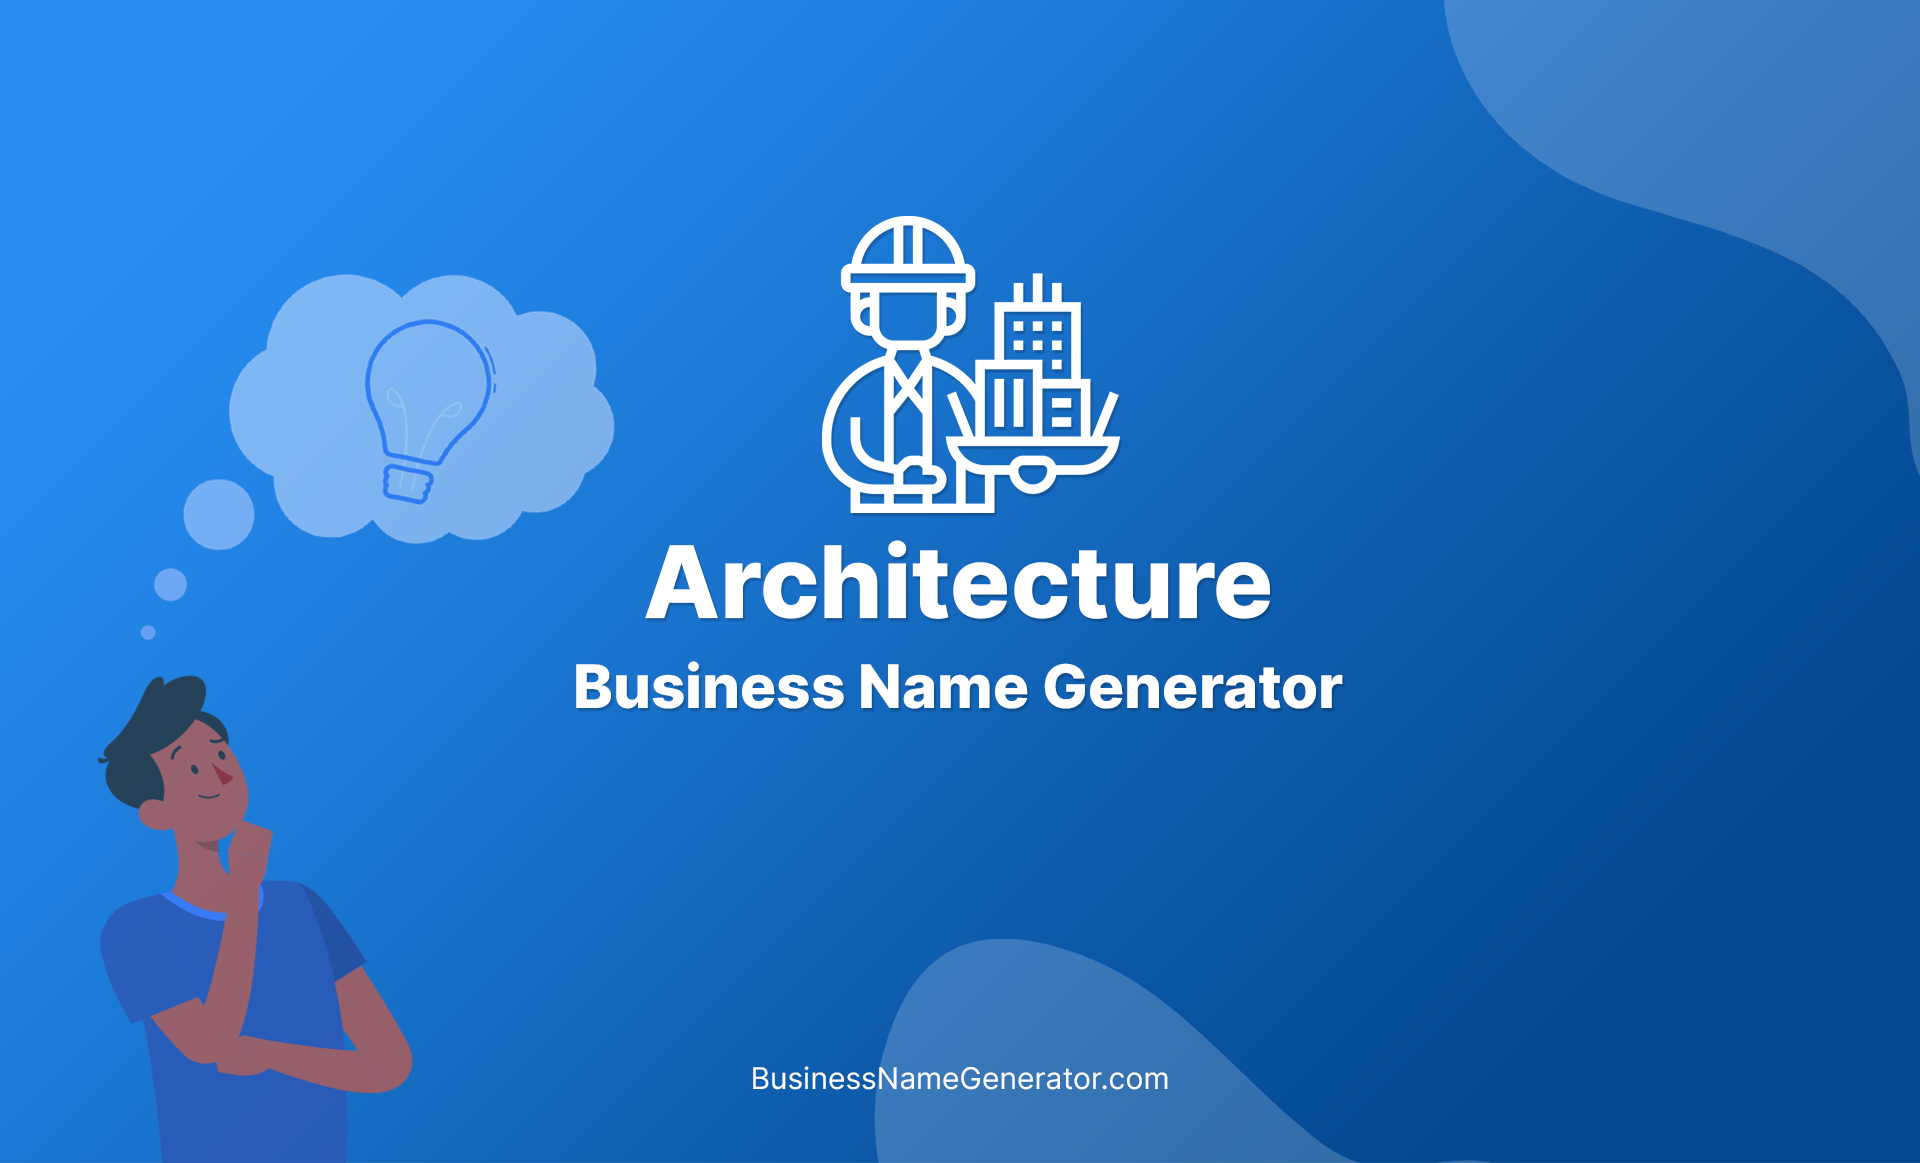 Architecture Business Name Generator